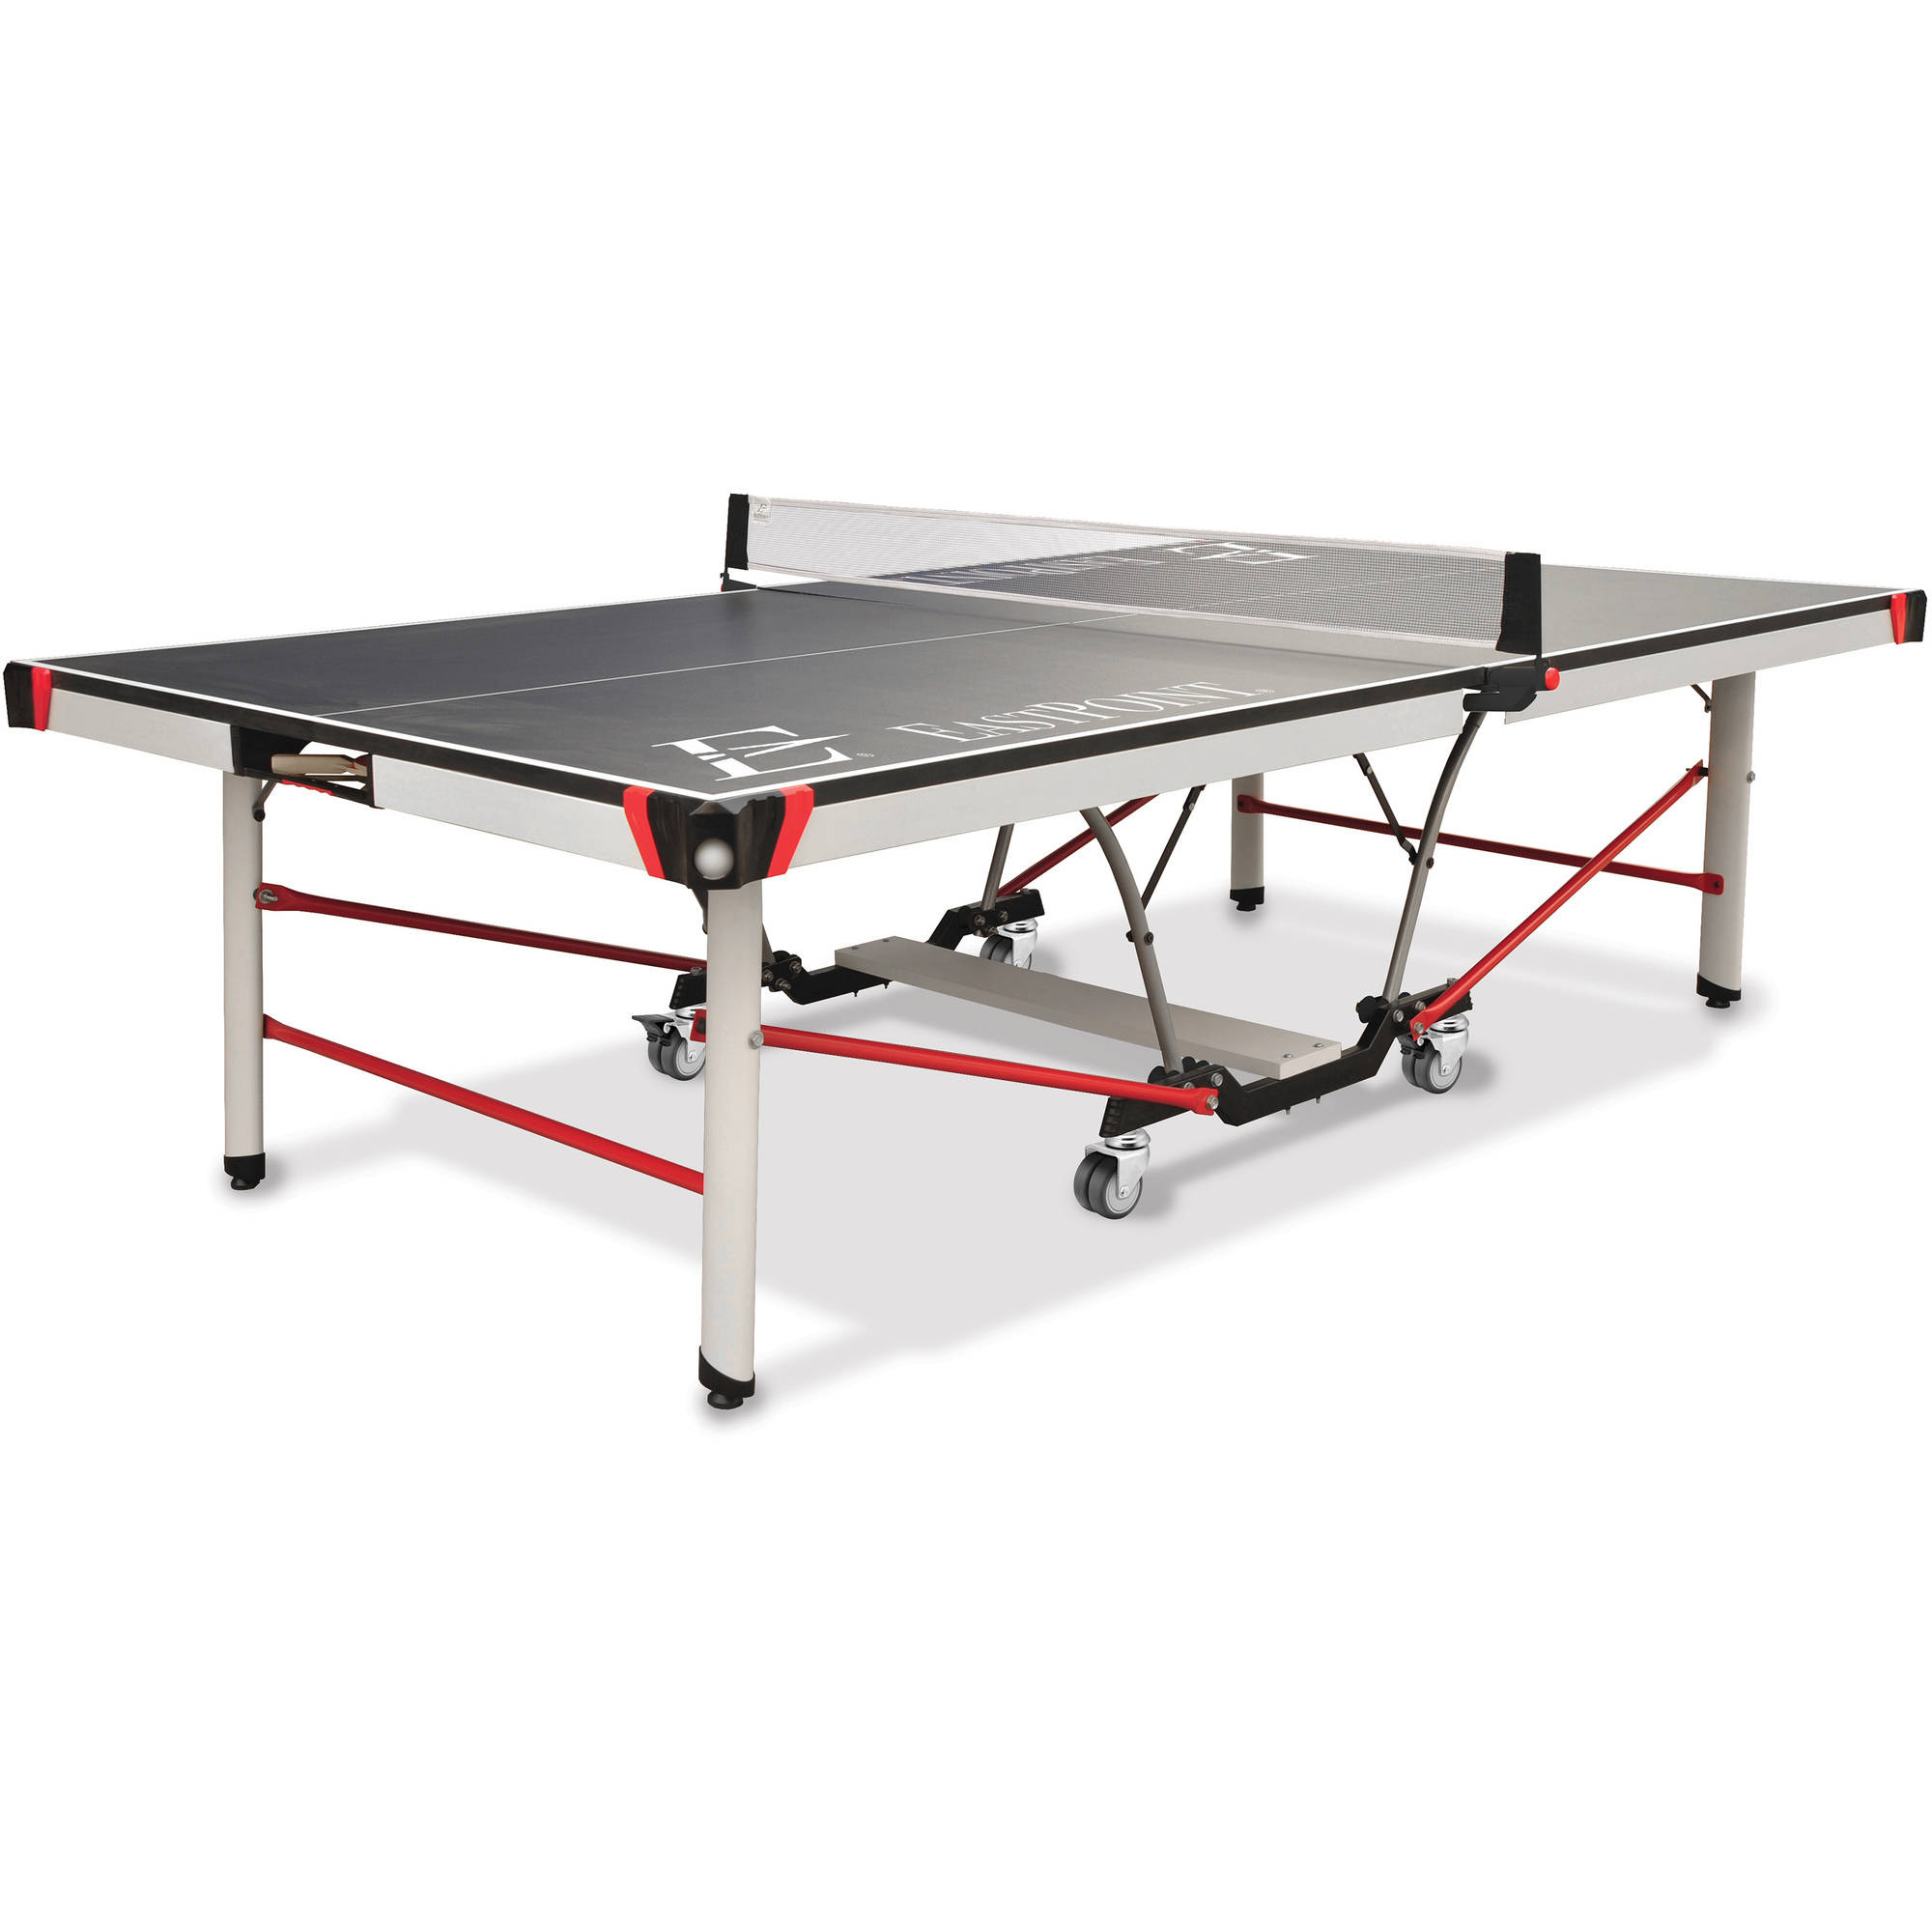 EastPoint Sports EPS 5000 2-Piece Table Tennis Table - 25mm Top - image 1 of 5